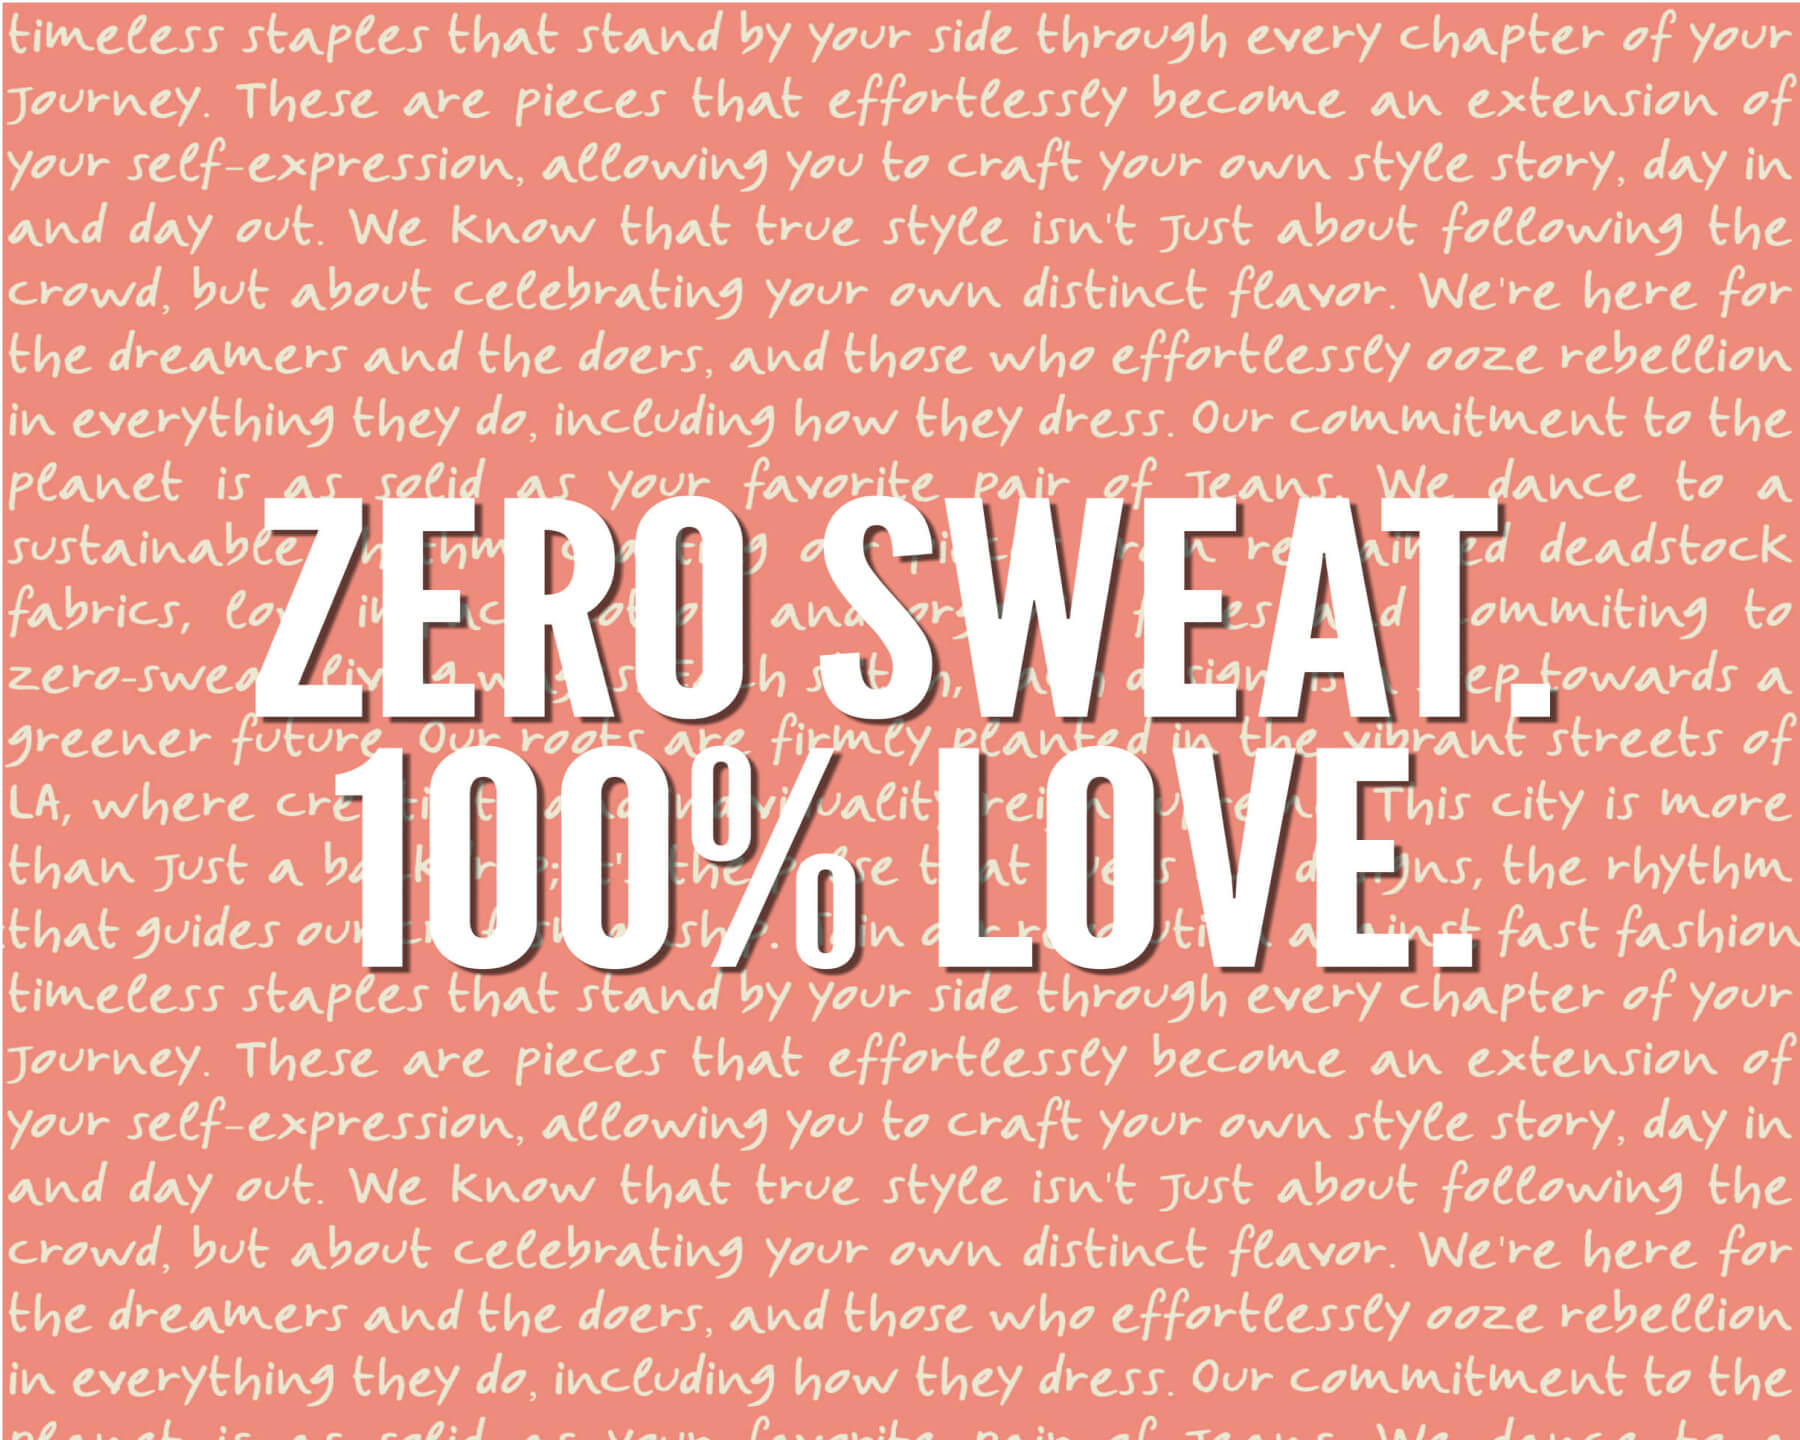 People of Leisure's Zero Sweat Policy